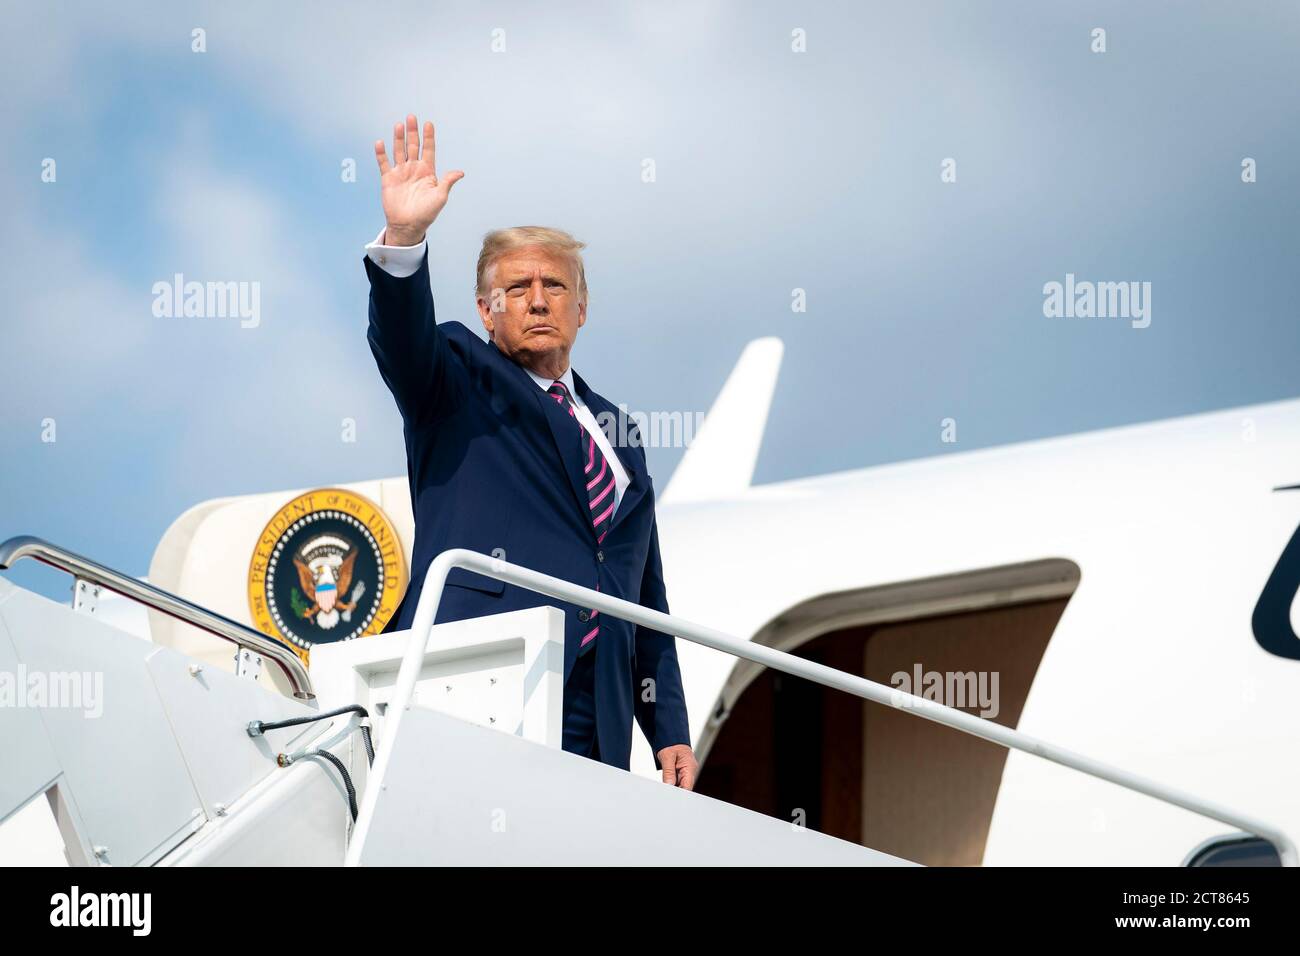 ANDREWS AIR FORCE BASE, MD, USA - 18 September 2020 - US president Donald Trump waves before boarding Air Force One at Andrews Air Force Base in Maryl Stock Photo